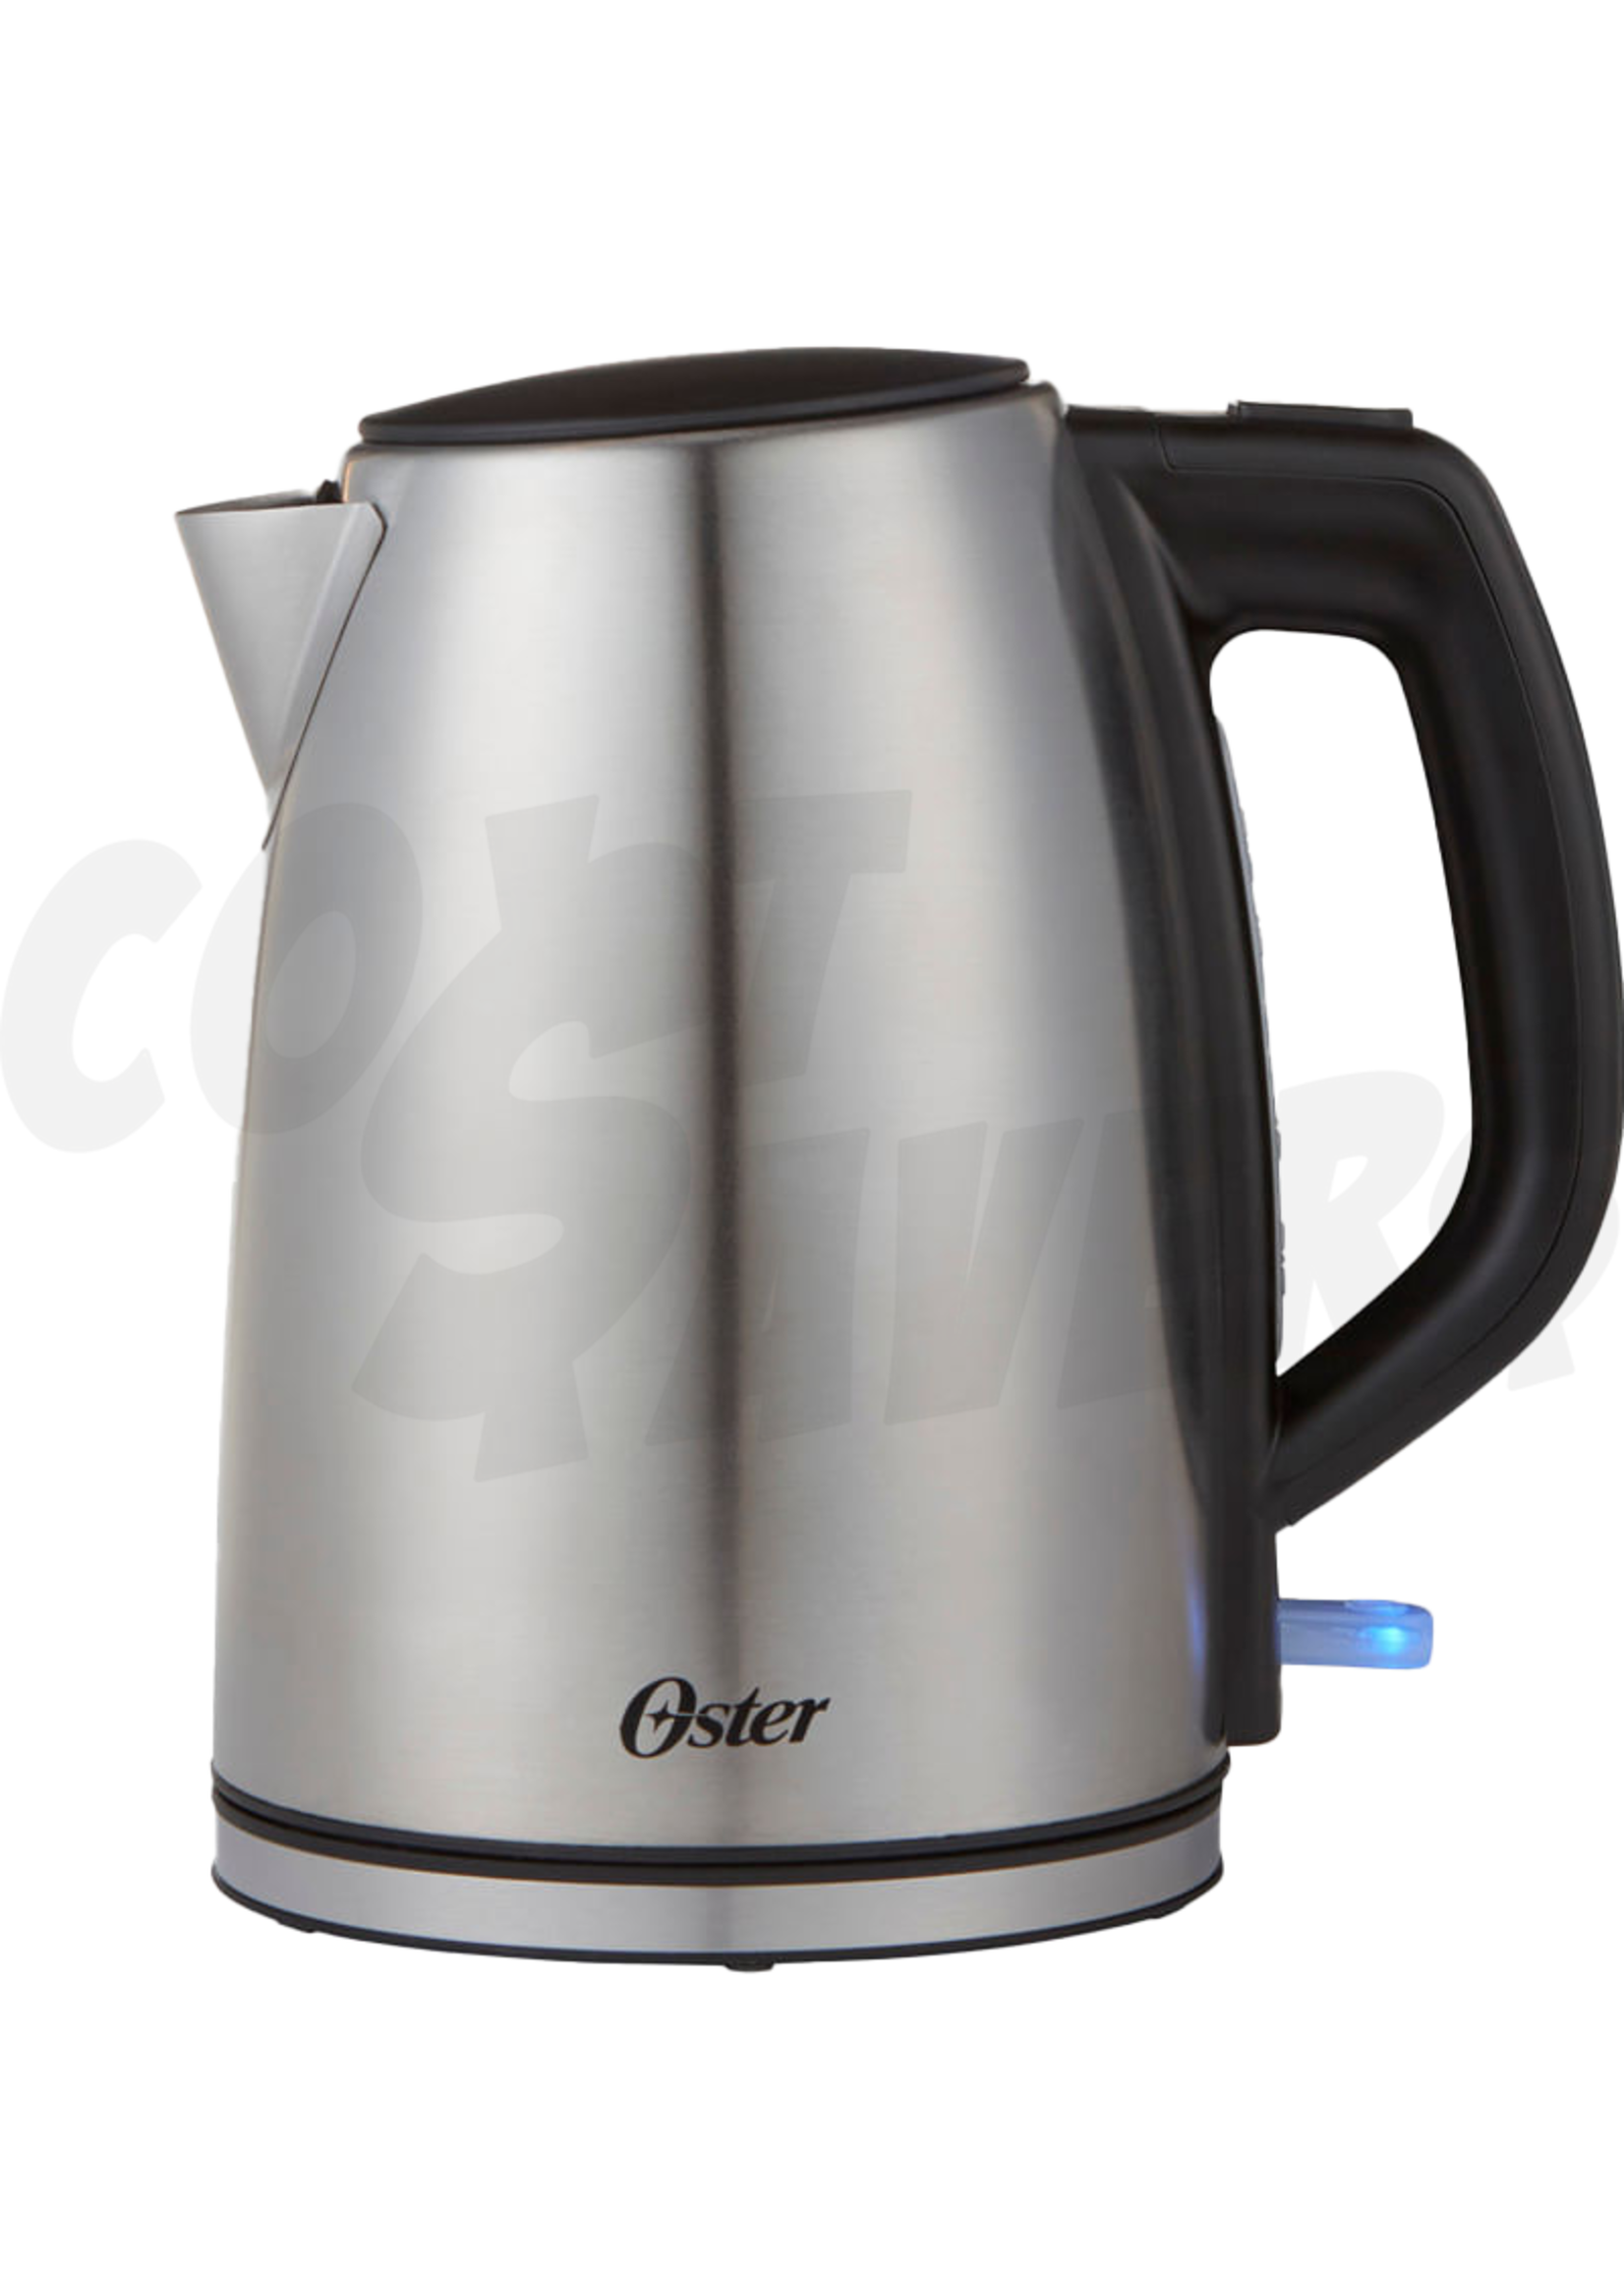 Oster Oster Electric Kettle S/Steel 1.7Lt